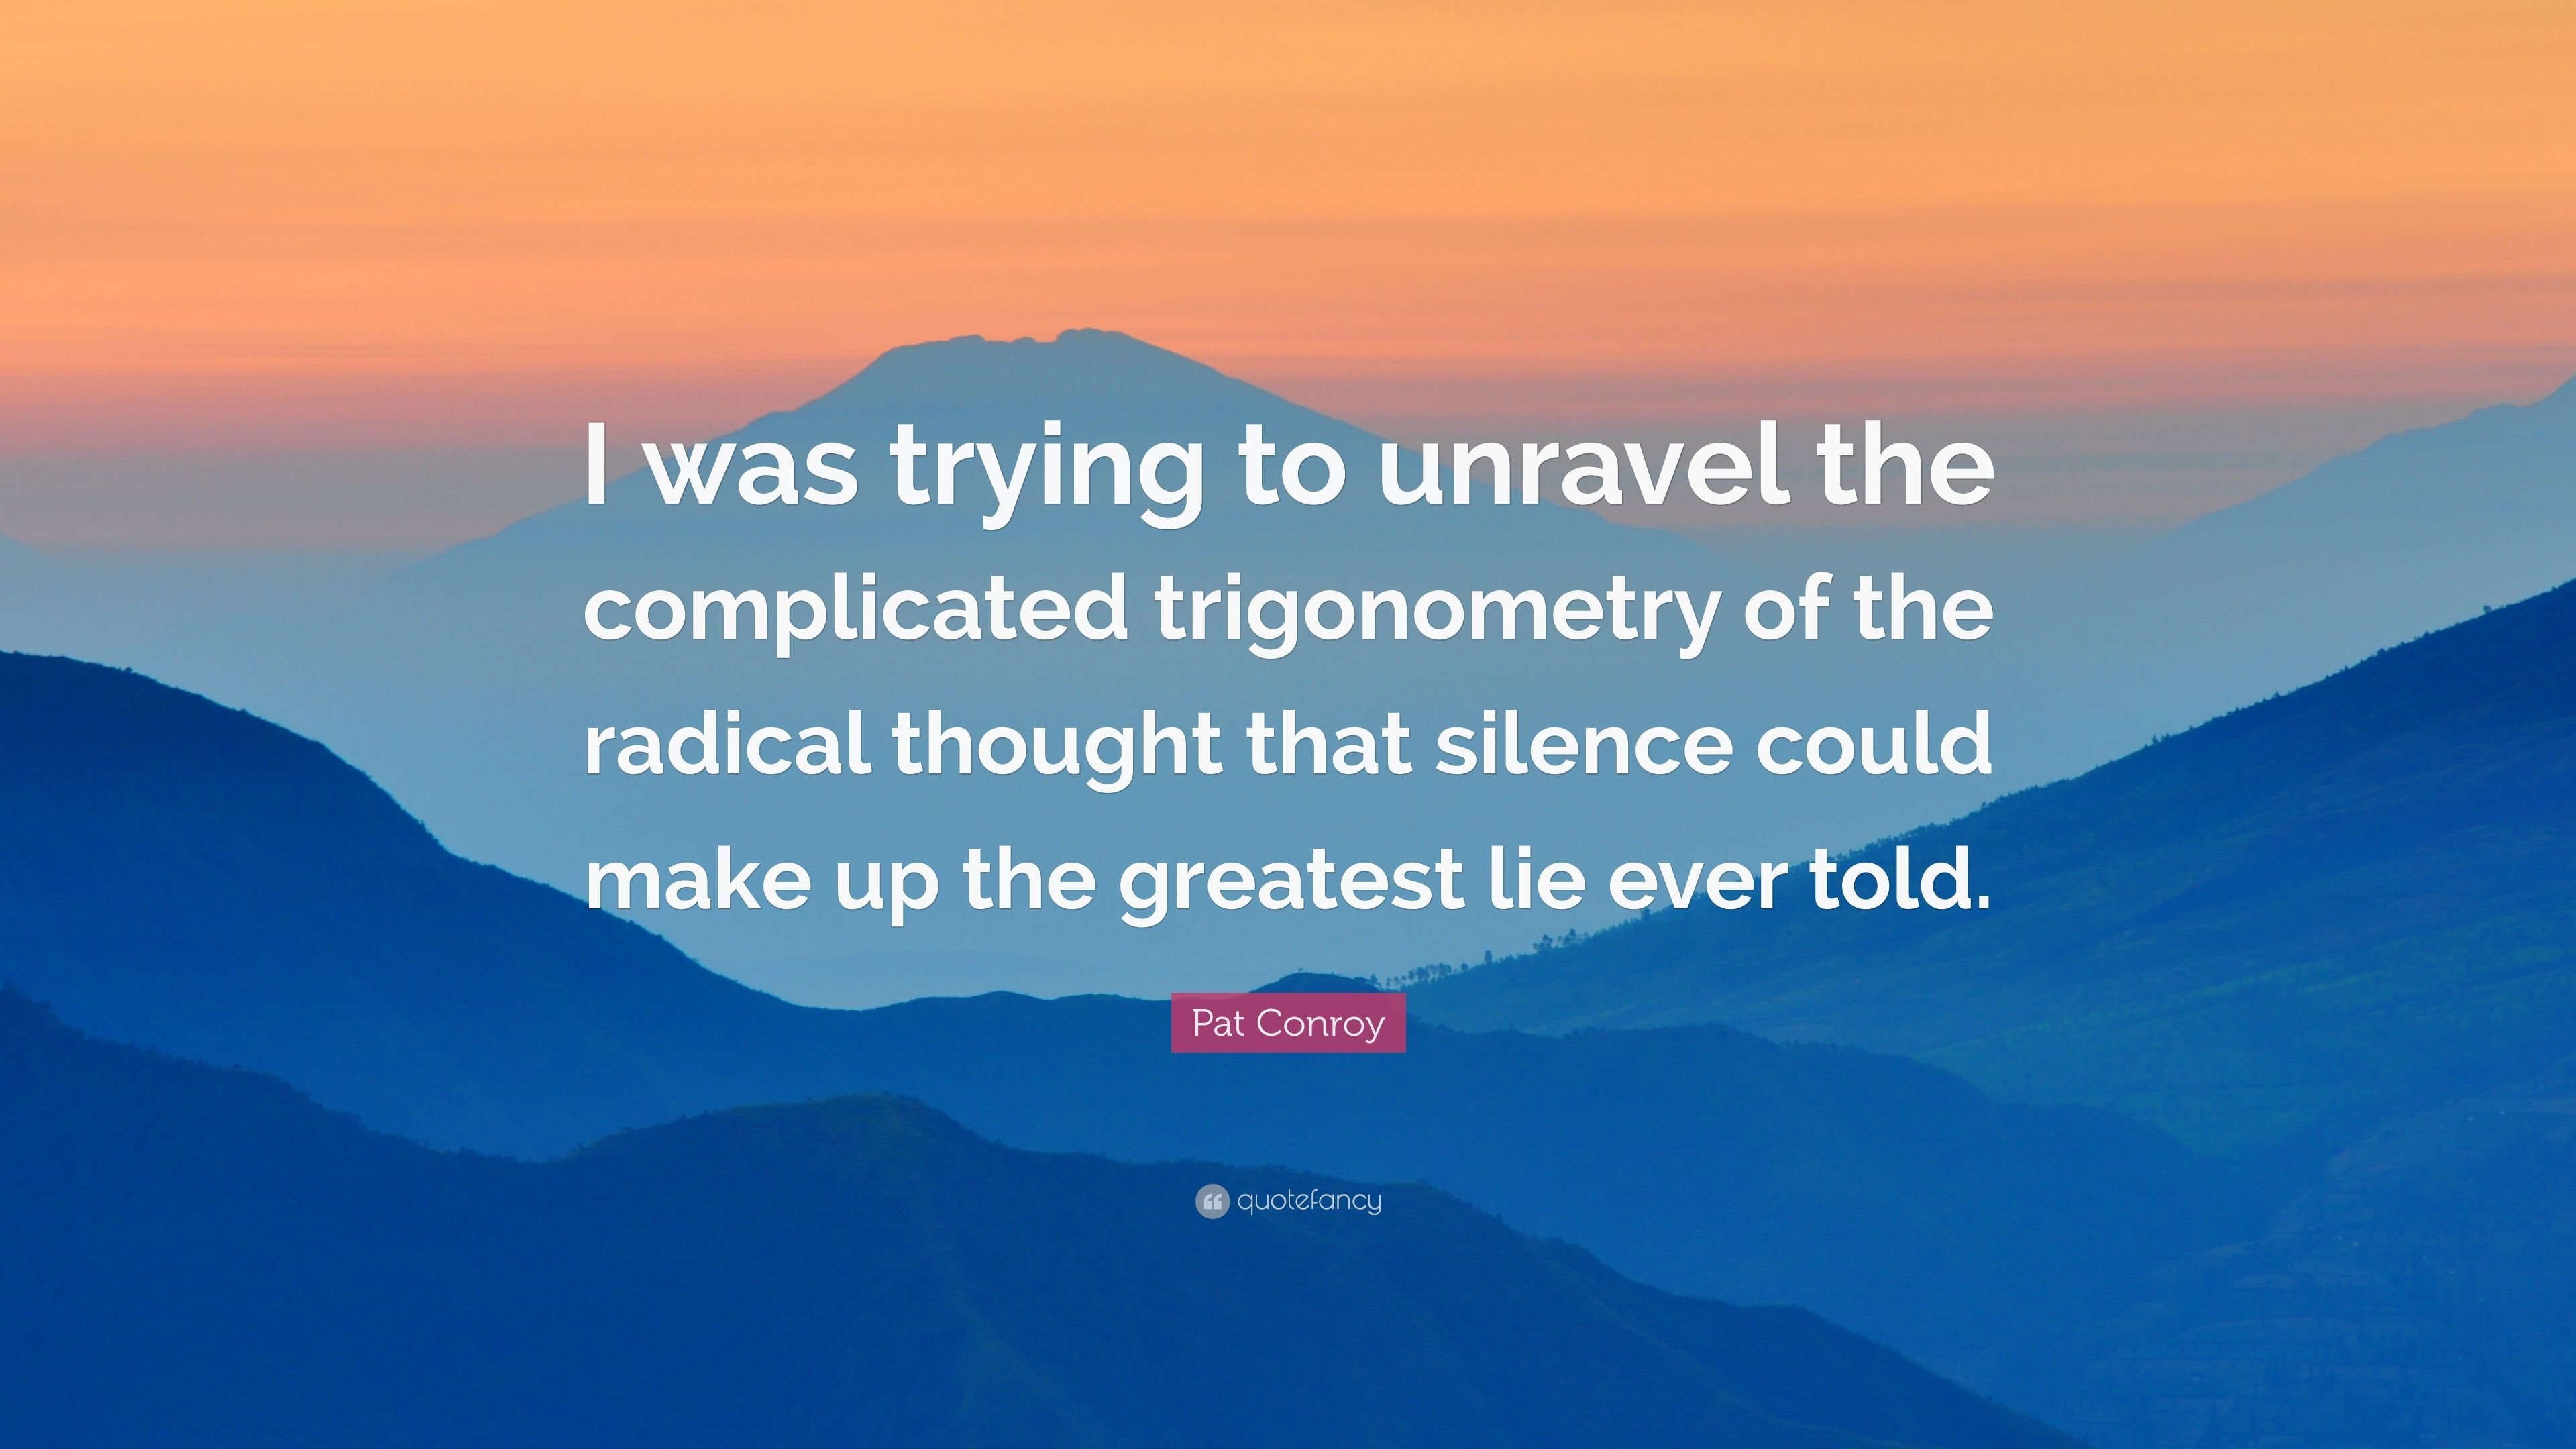 Pat Conroy Quote: “I was trying to unravel the complicated trigonometry of the radical thought that silence could make up the greatest lie .” (7 wallpaper)